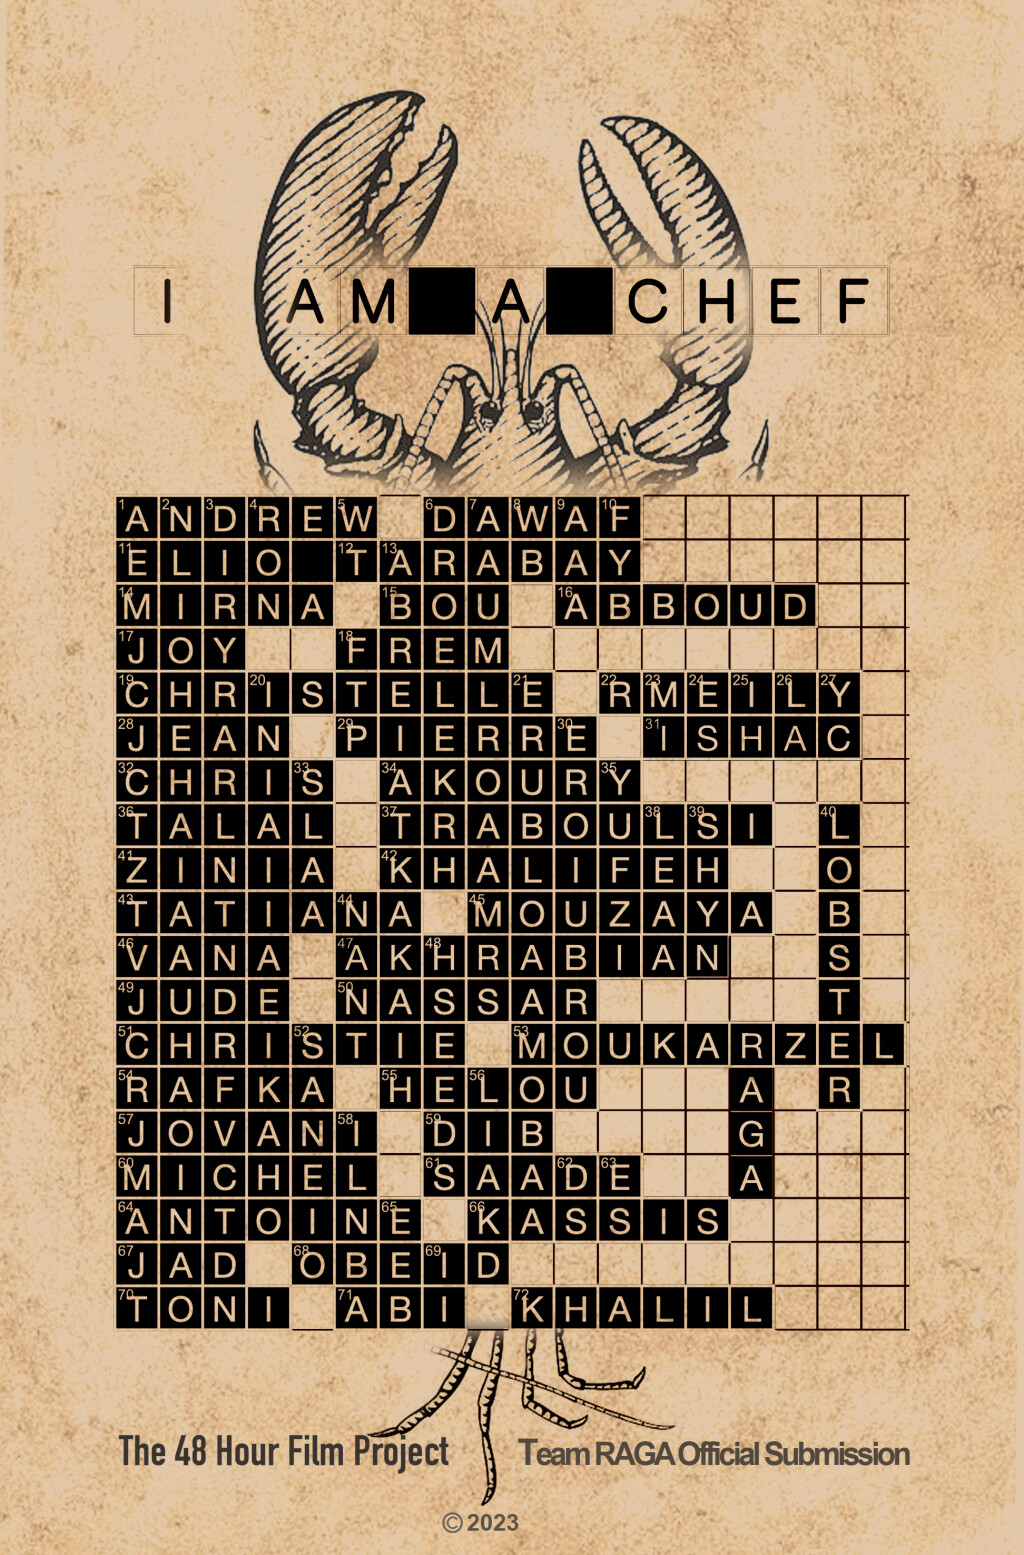 Filmposter for I AM A CHEF